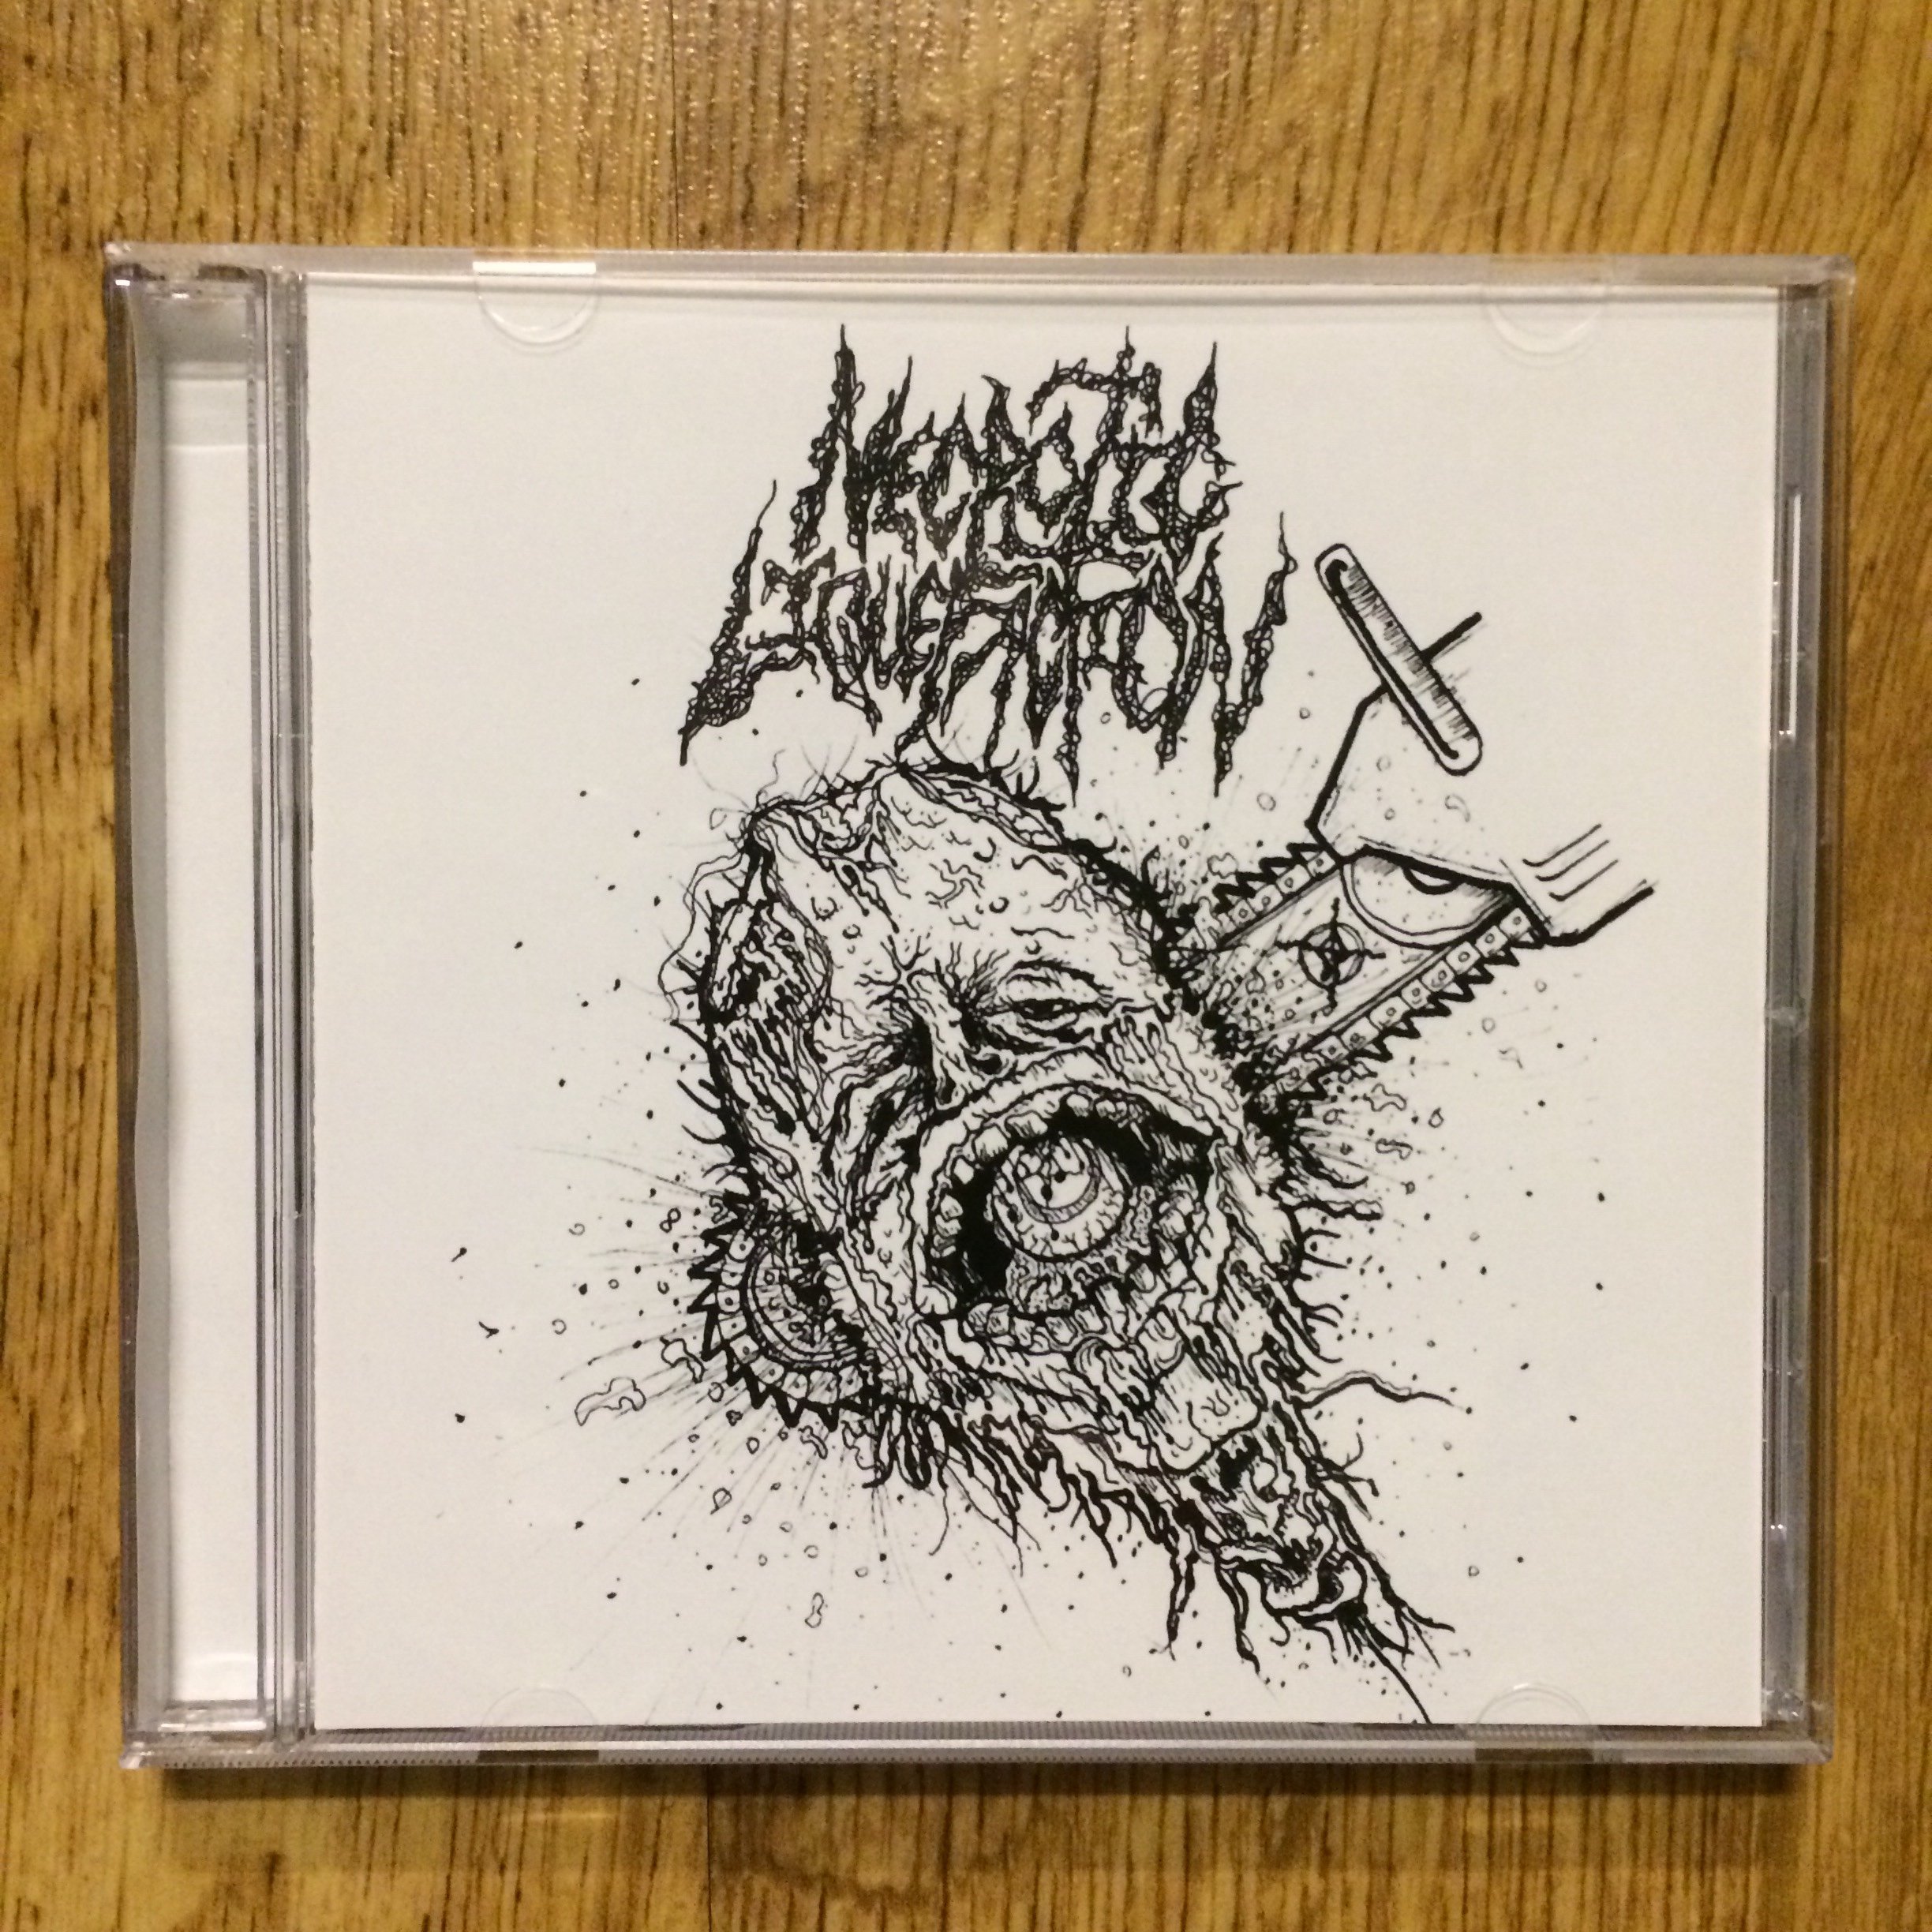 Photo of the Necrotic Liquefaction - "St. Demo" CD